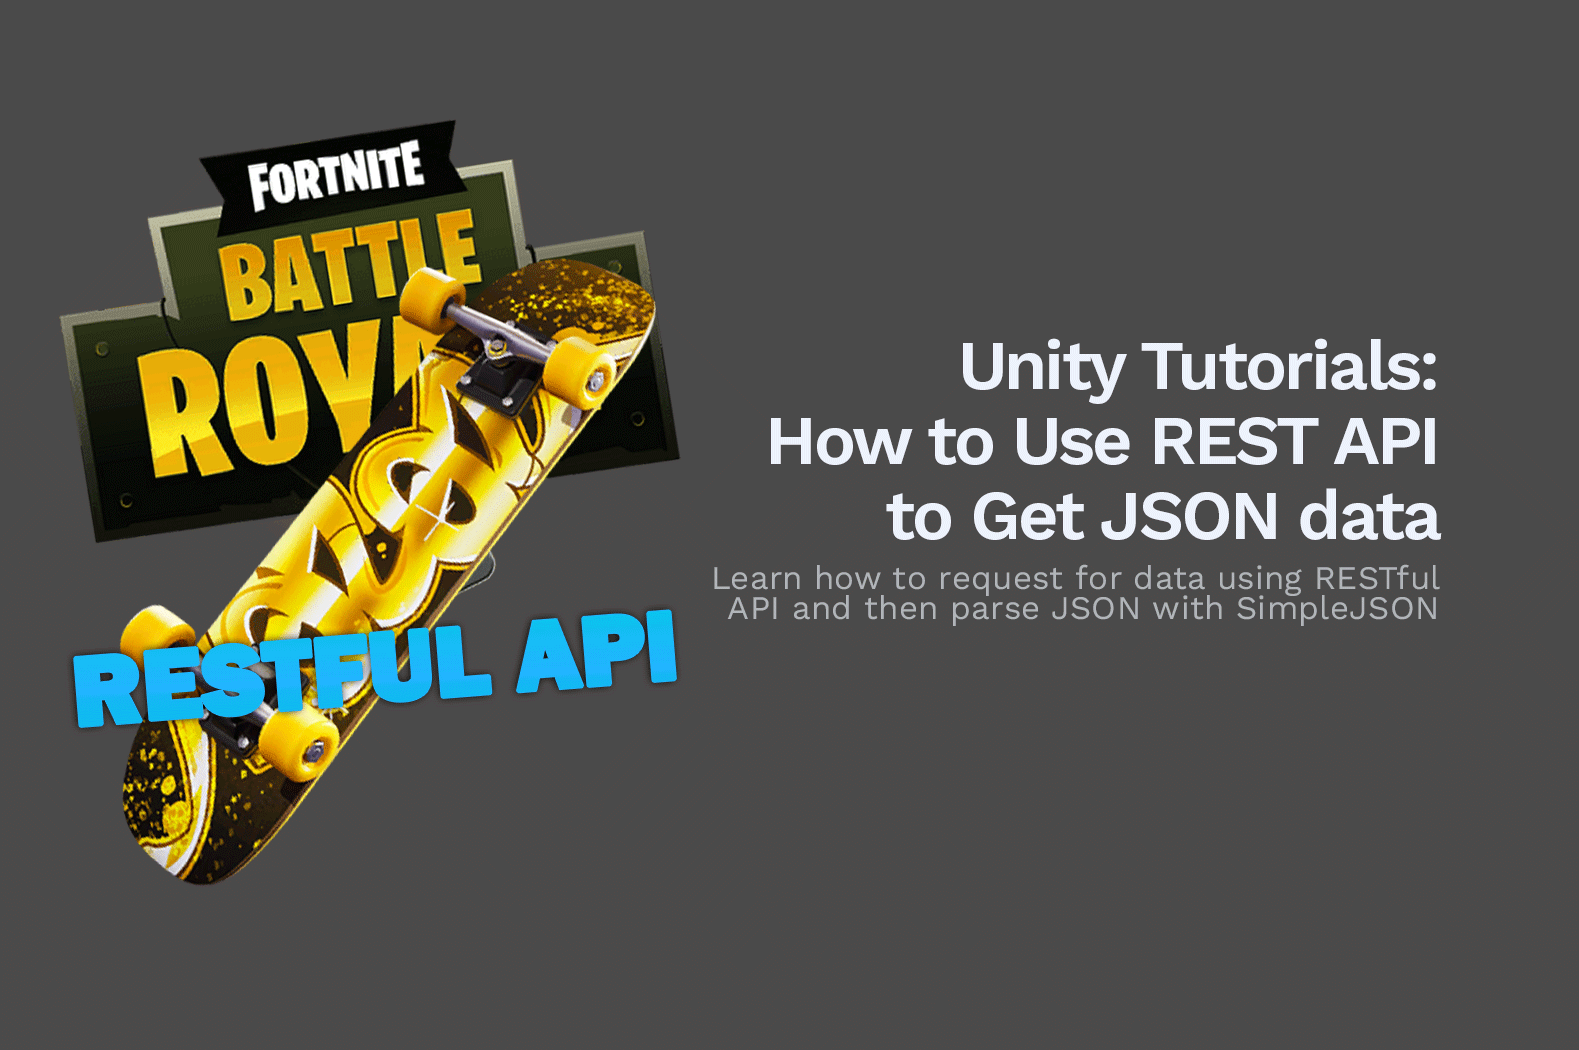 Unity Tutorials: How to Use REST API to Get JSON data